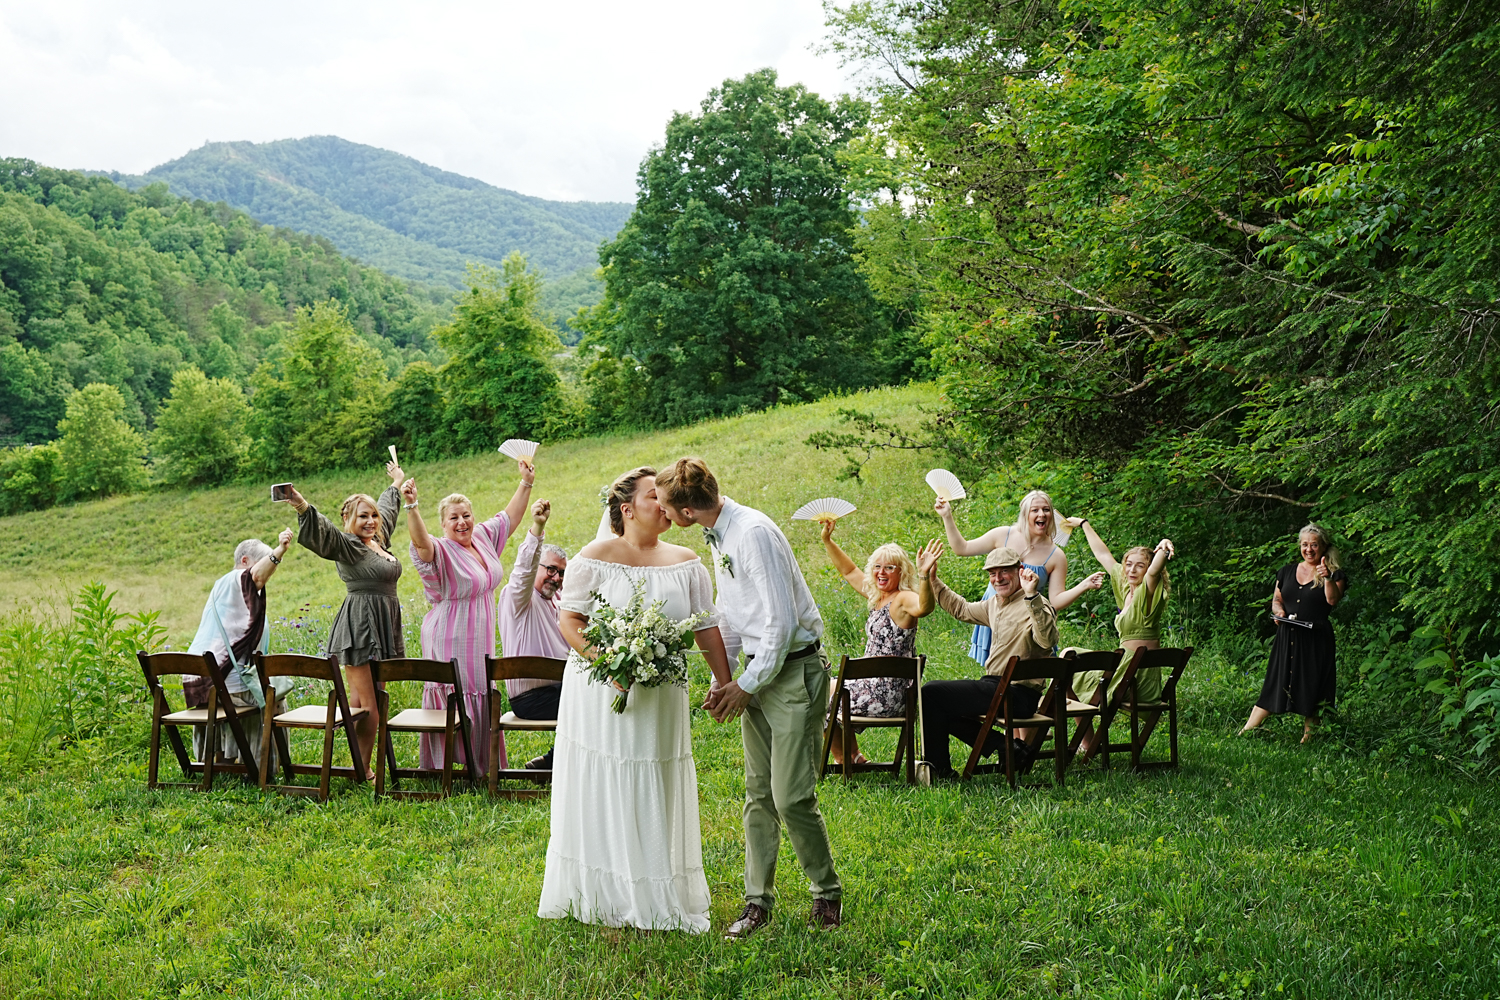 Wedding guests cheering in the background while a bride and groom kisses after their ceremony at a mountain view